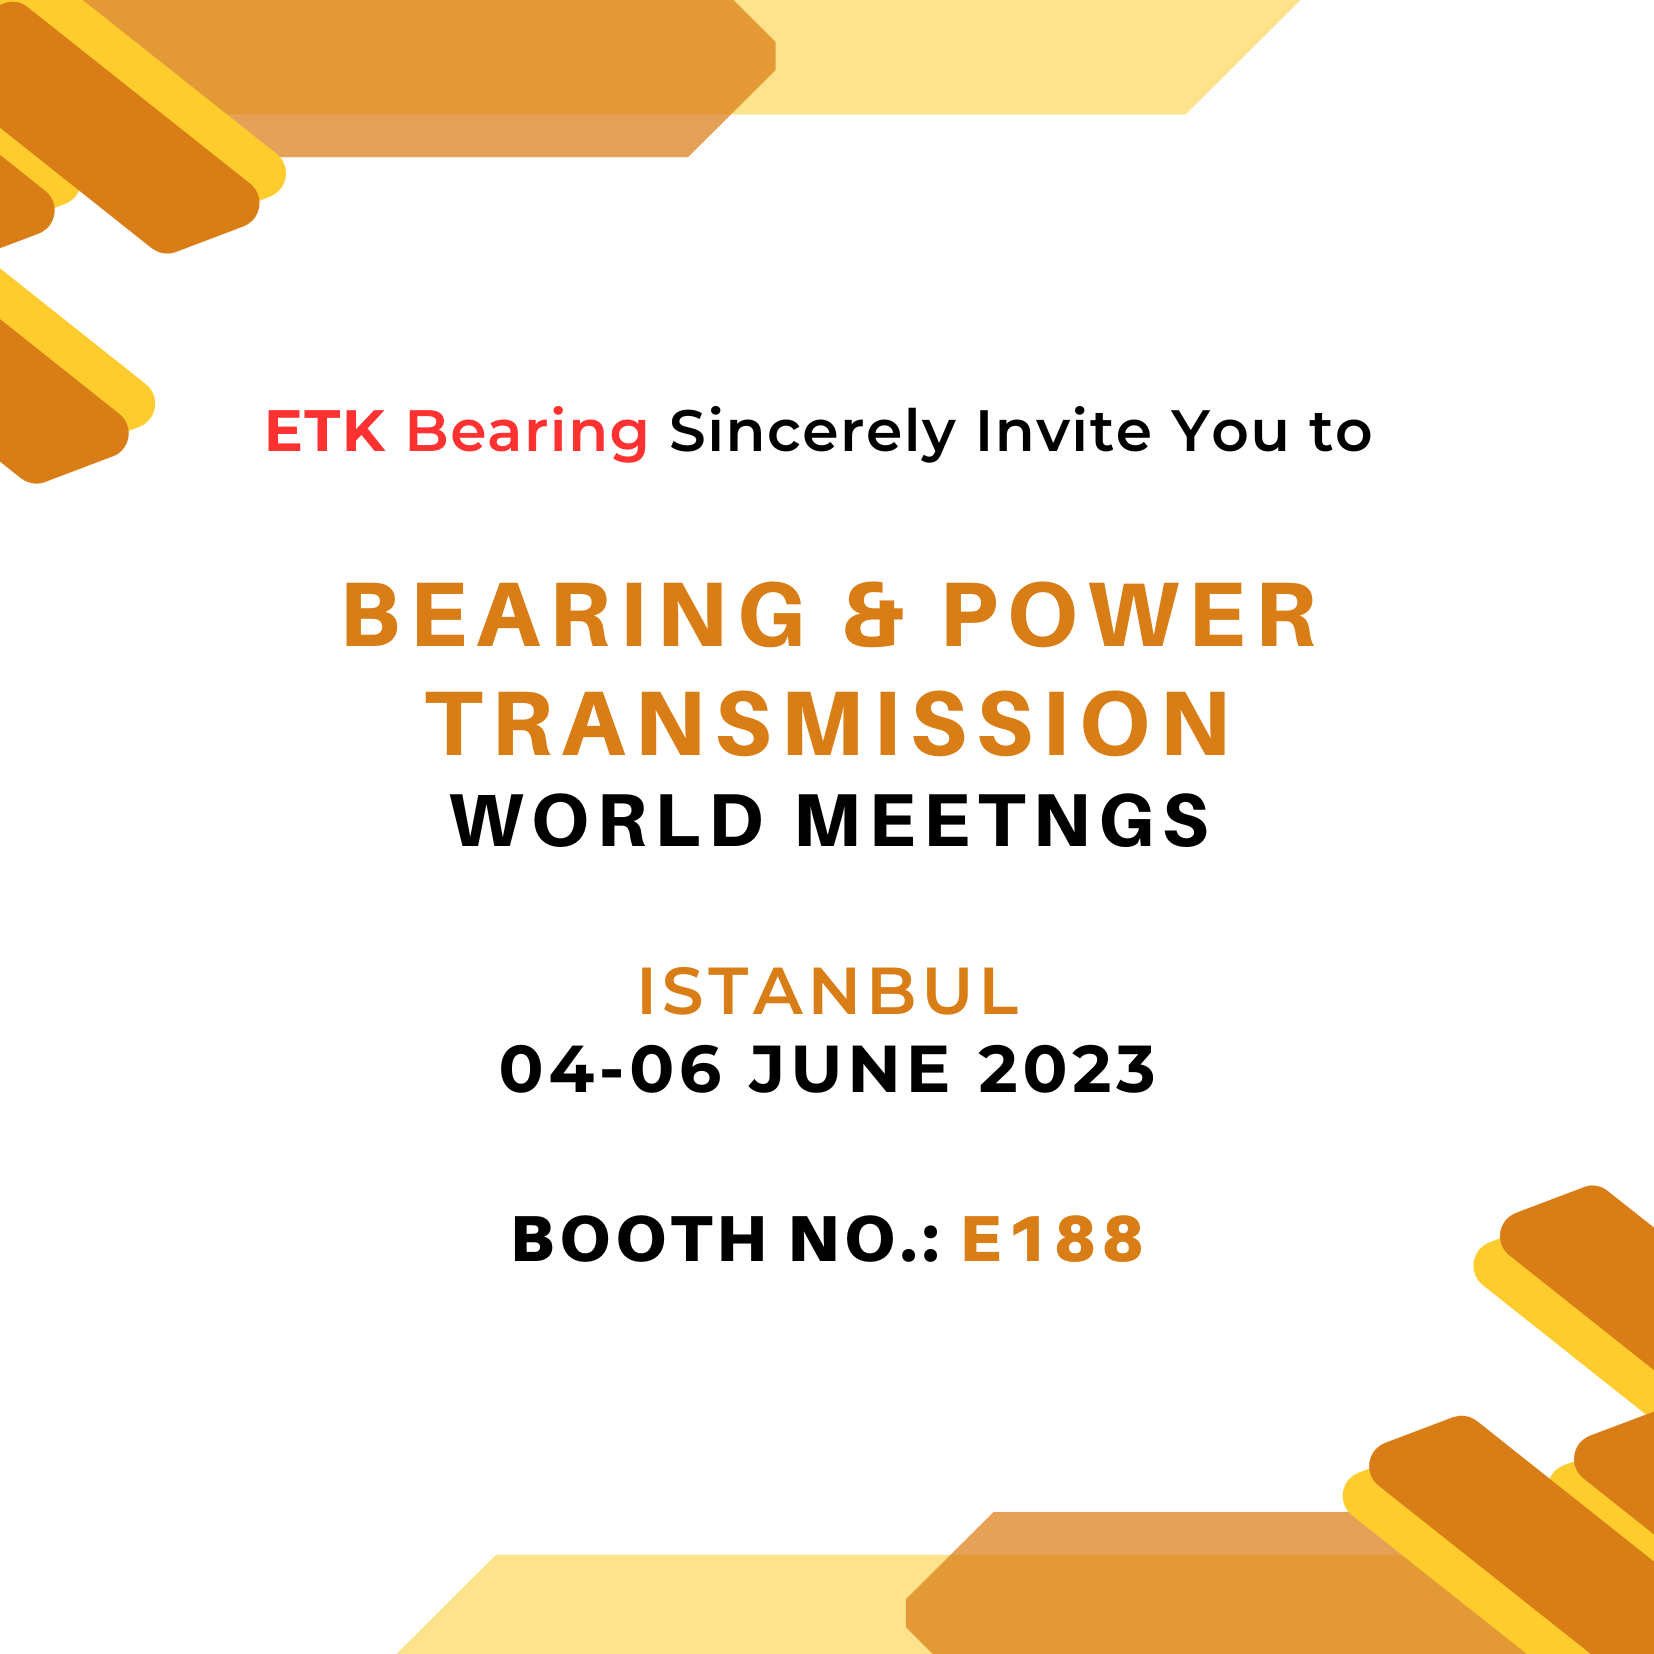 The Invitation to The World Bearing & Power Transmission Meetings 2023